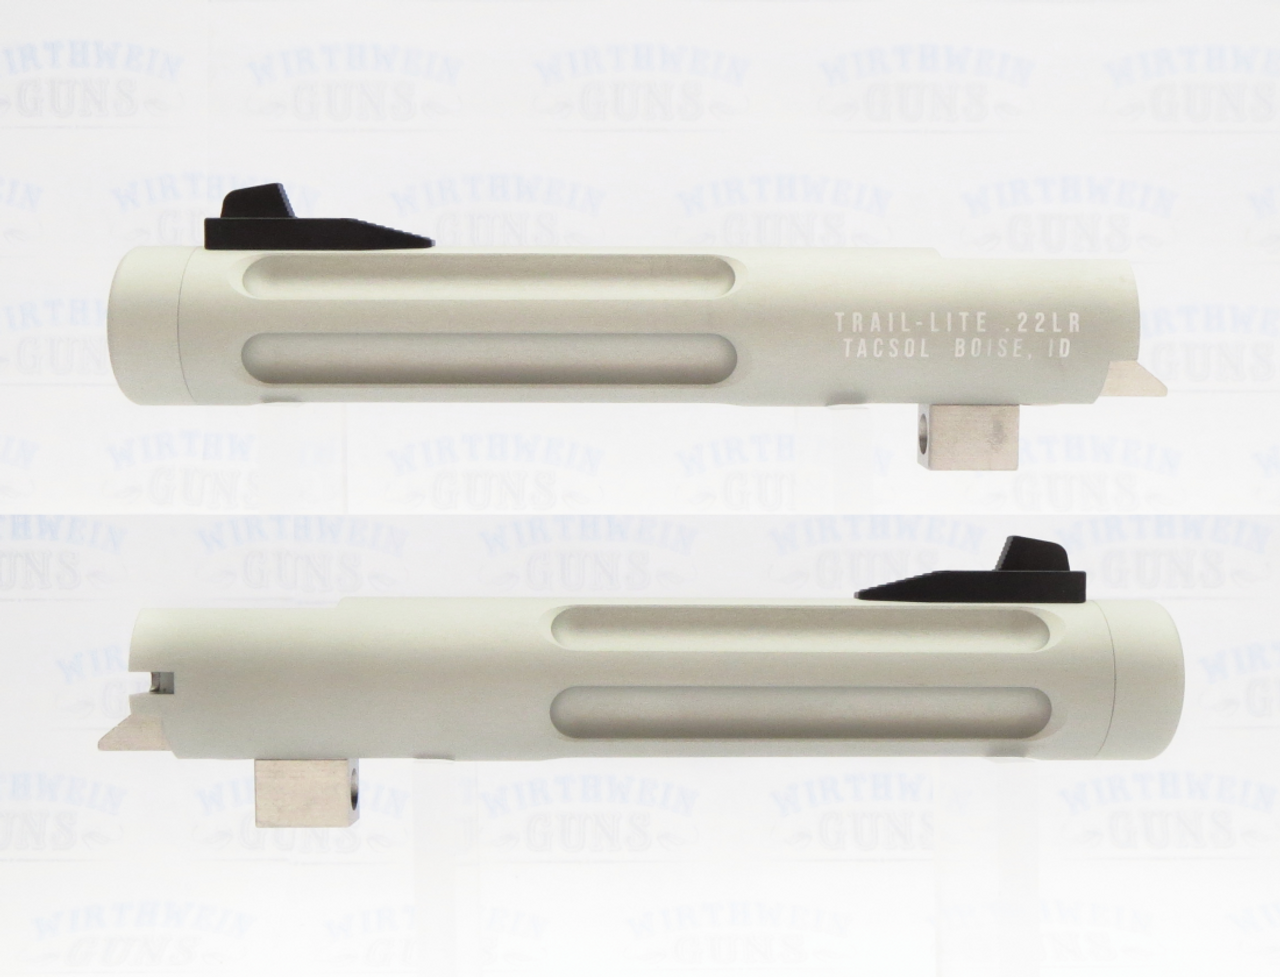 TacSol Tactical Solutions Fluted 5.5" Trail-Lite Browning Buck Mark Barrel Threaded 1/2" x 28 Matte Silver